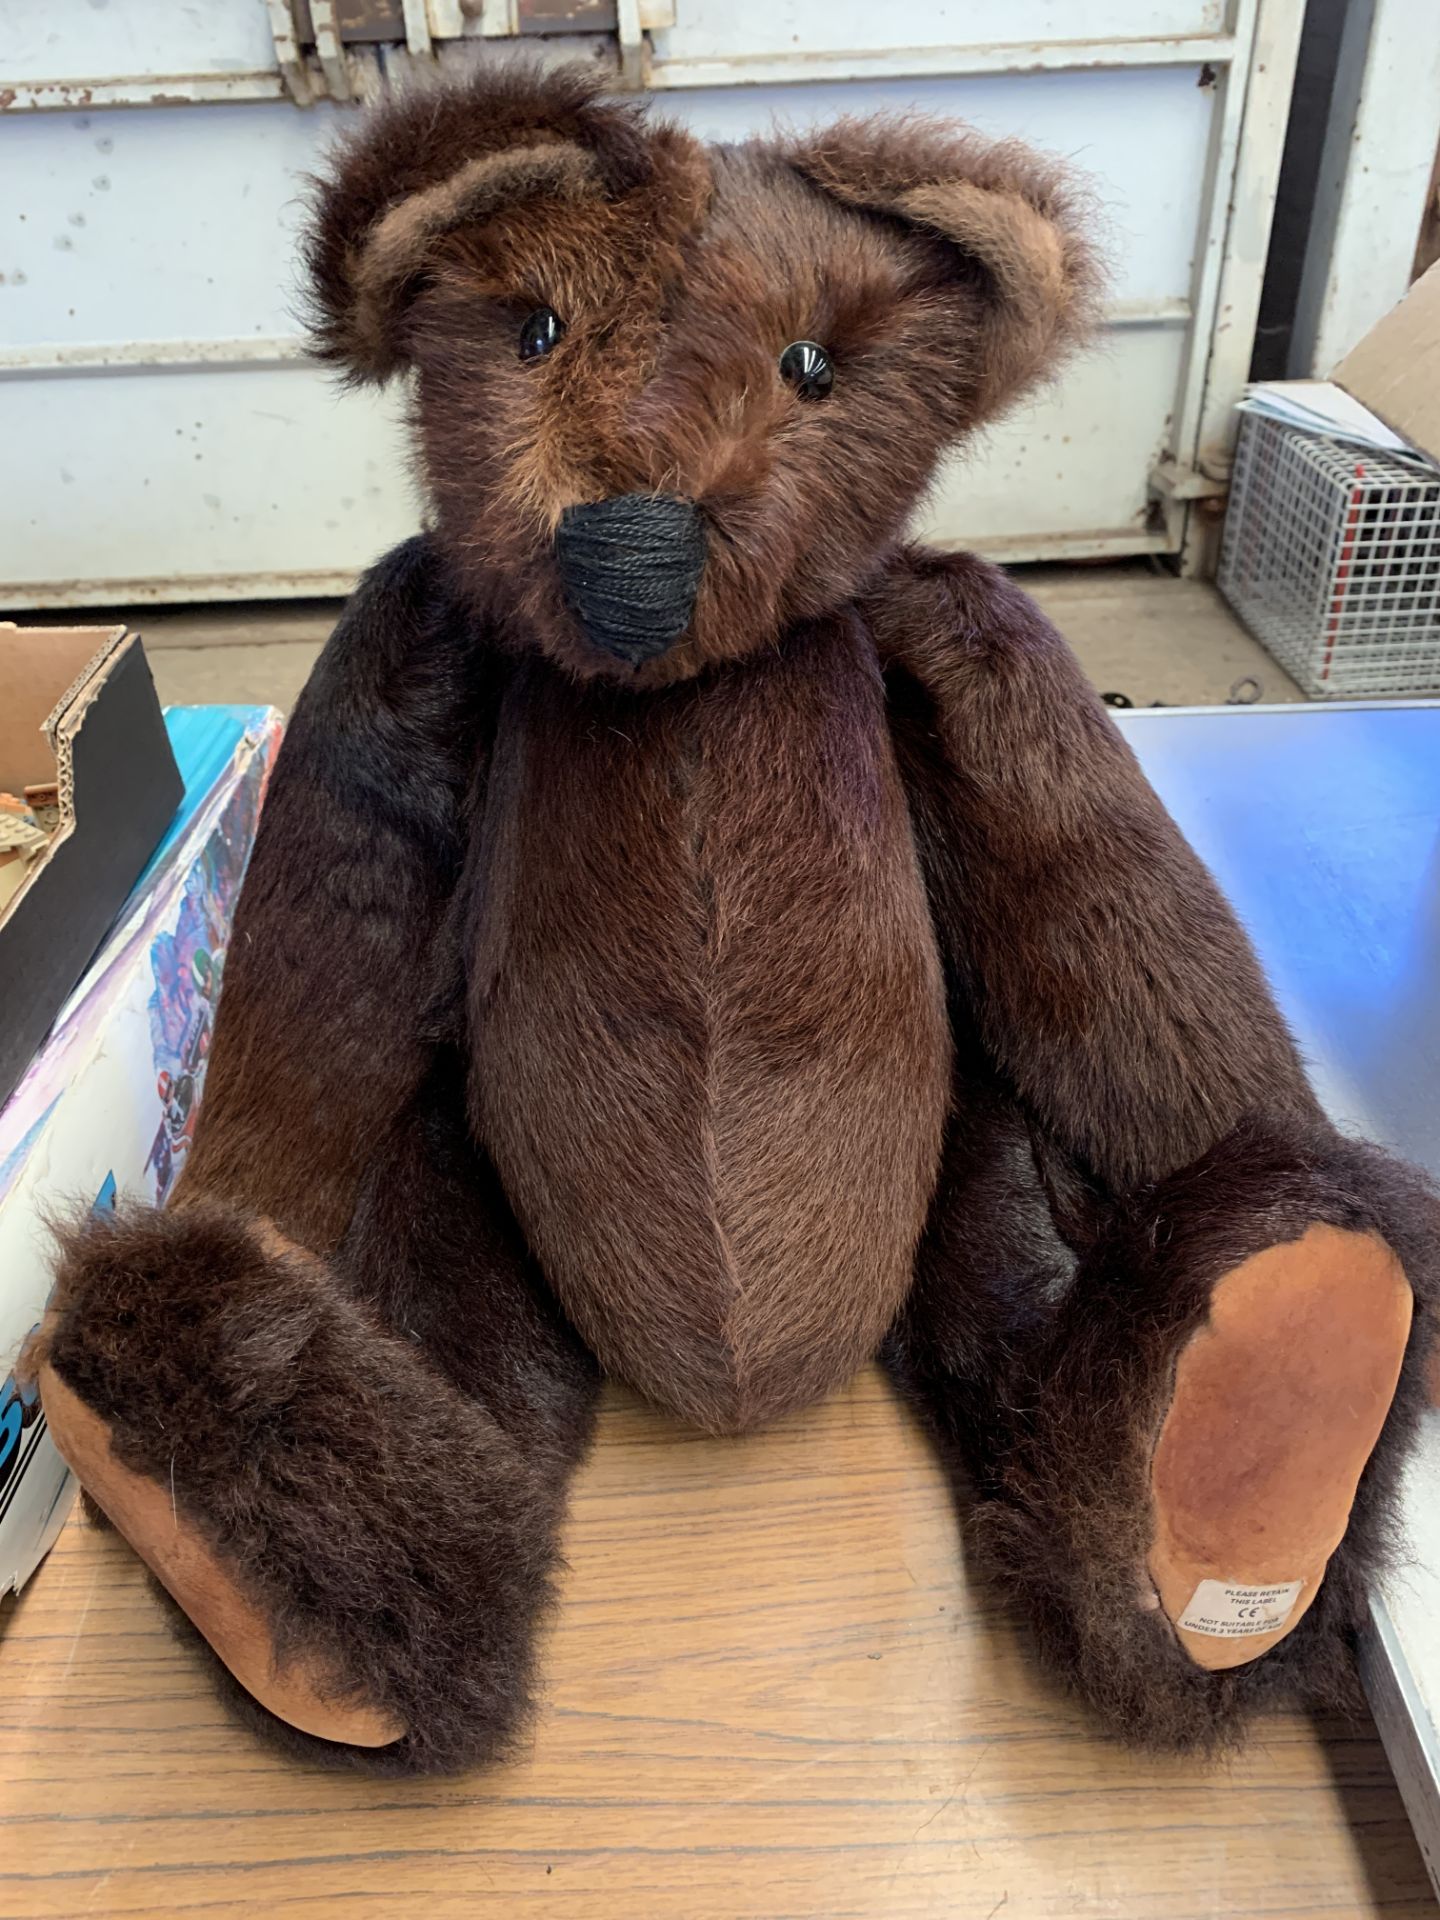 A large brown jointed teddy bear